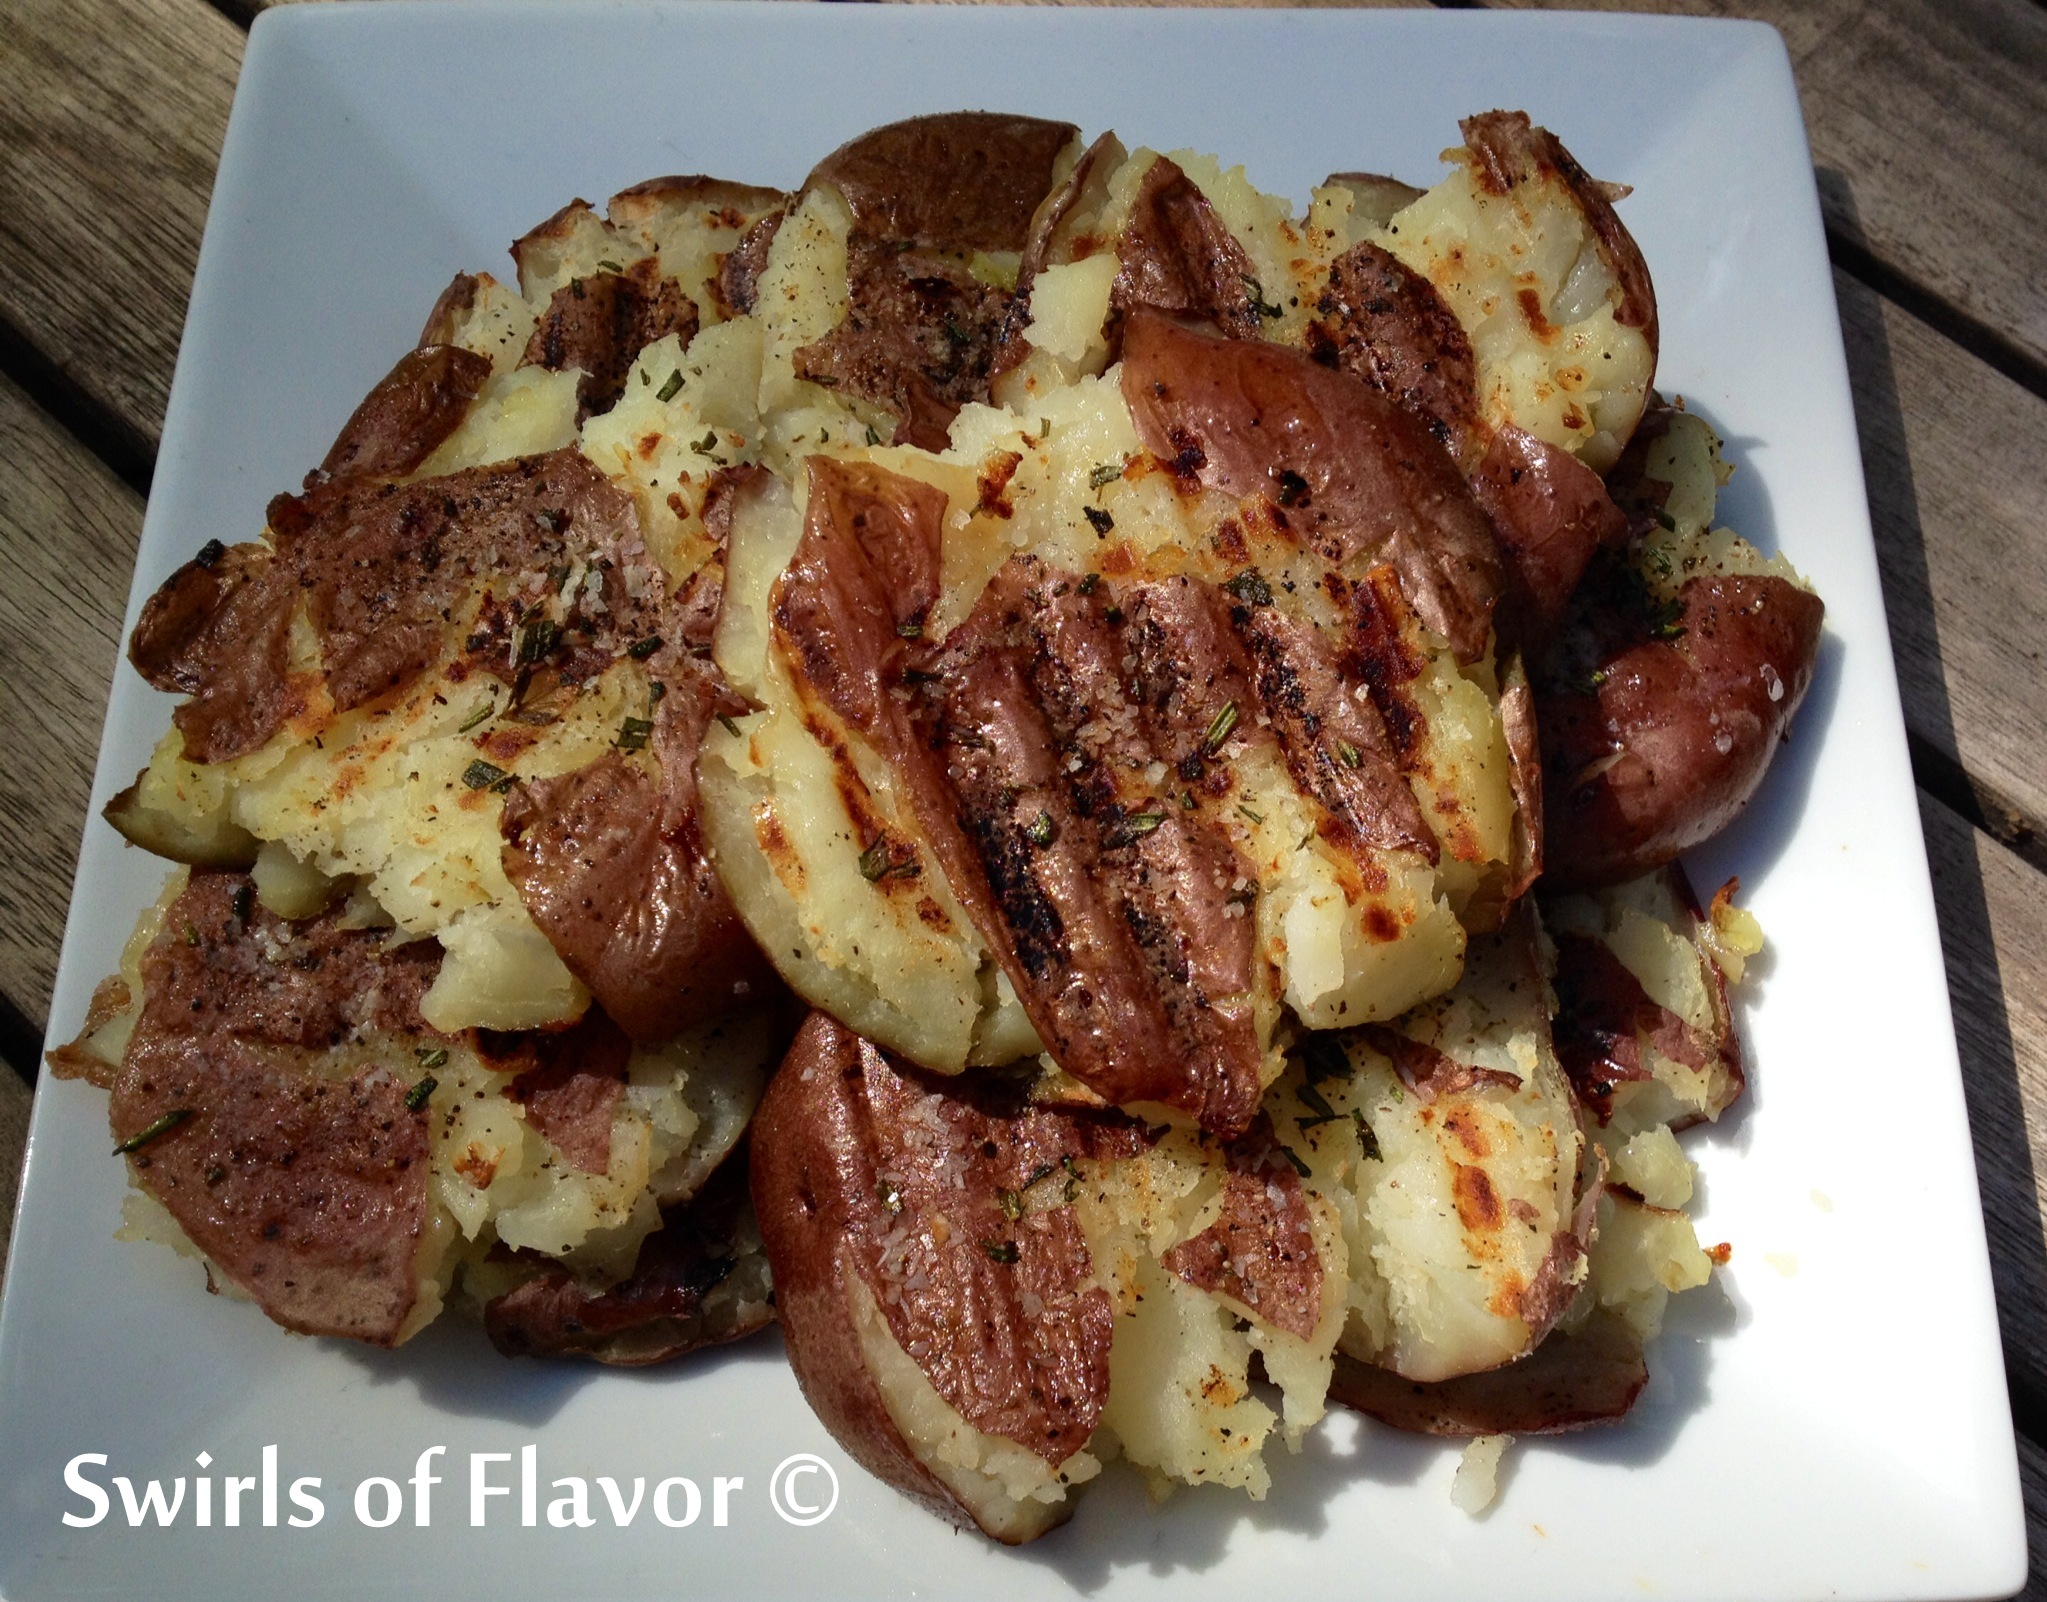 Grilled Smashed Rosemary Potatoes are an easy side dish recipe that cook on the grill and are perfectly seasoned with fresh rosemary and garlic powder! easy recipe | Father's Day | grilling | potatoes | fresh herbs | rosemary | #swirlsofflavor